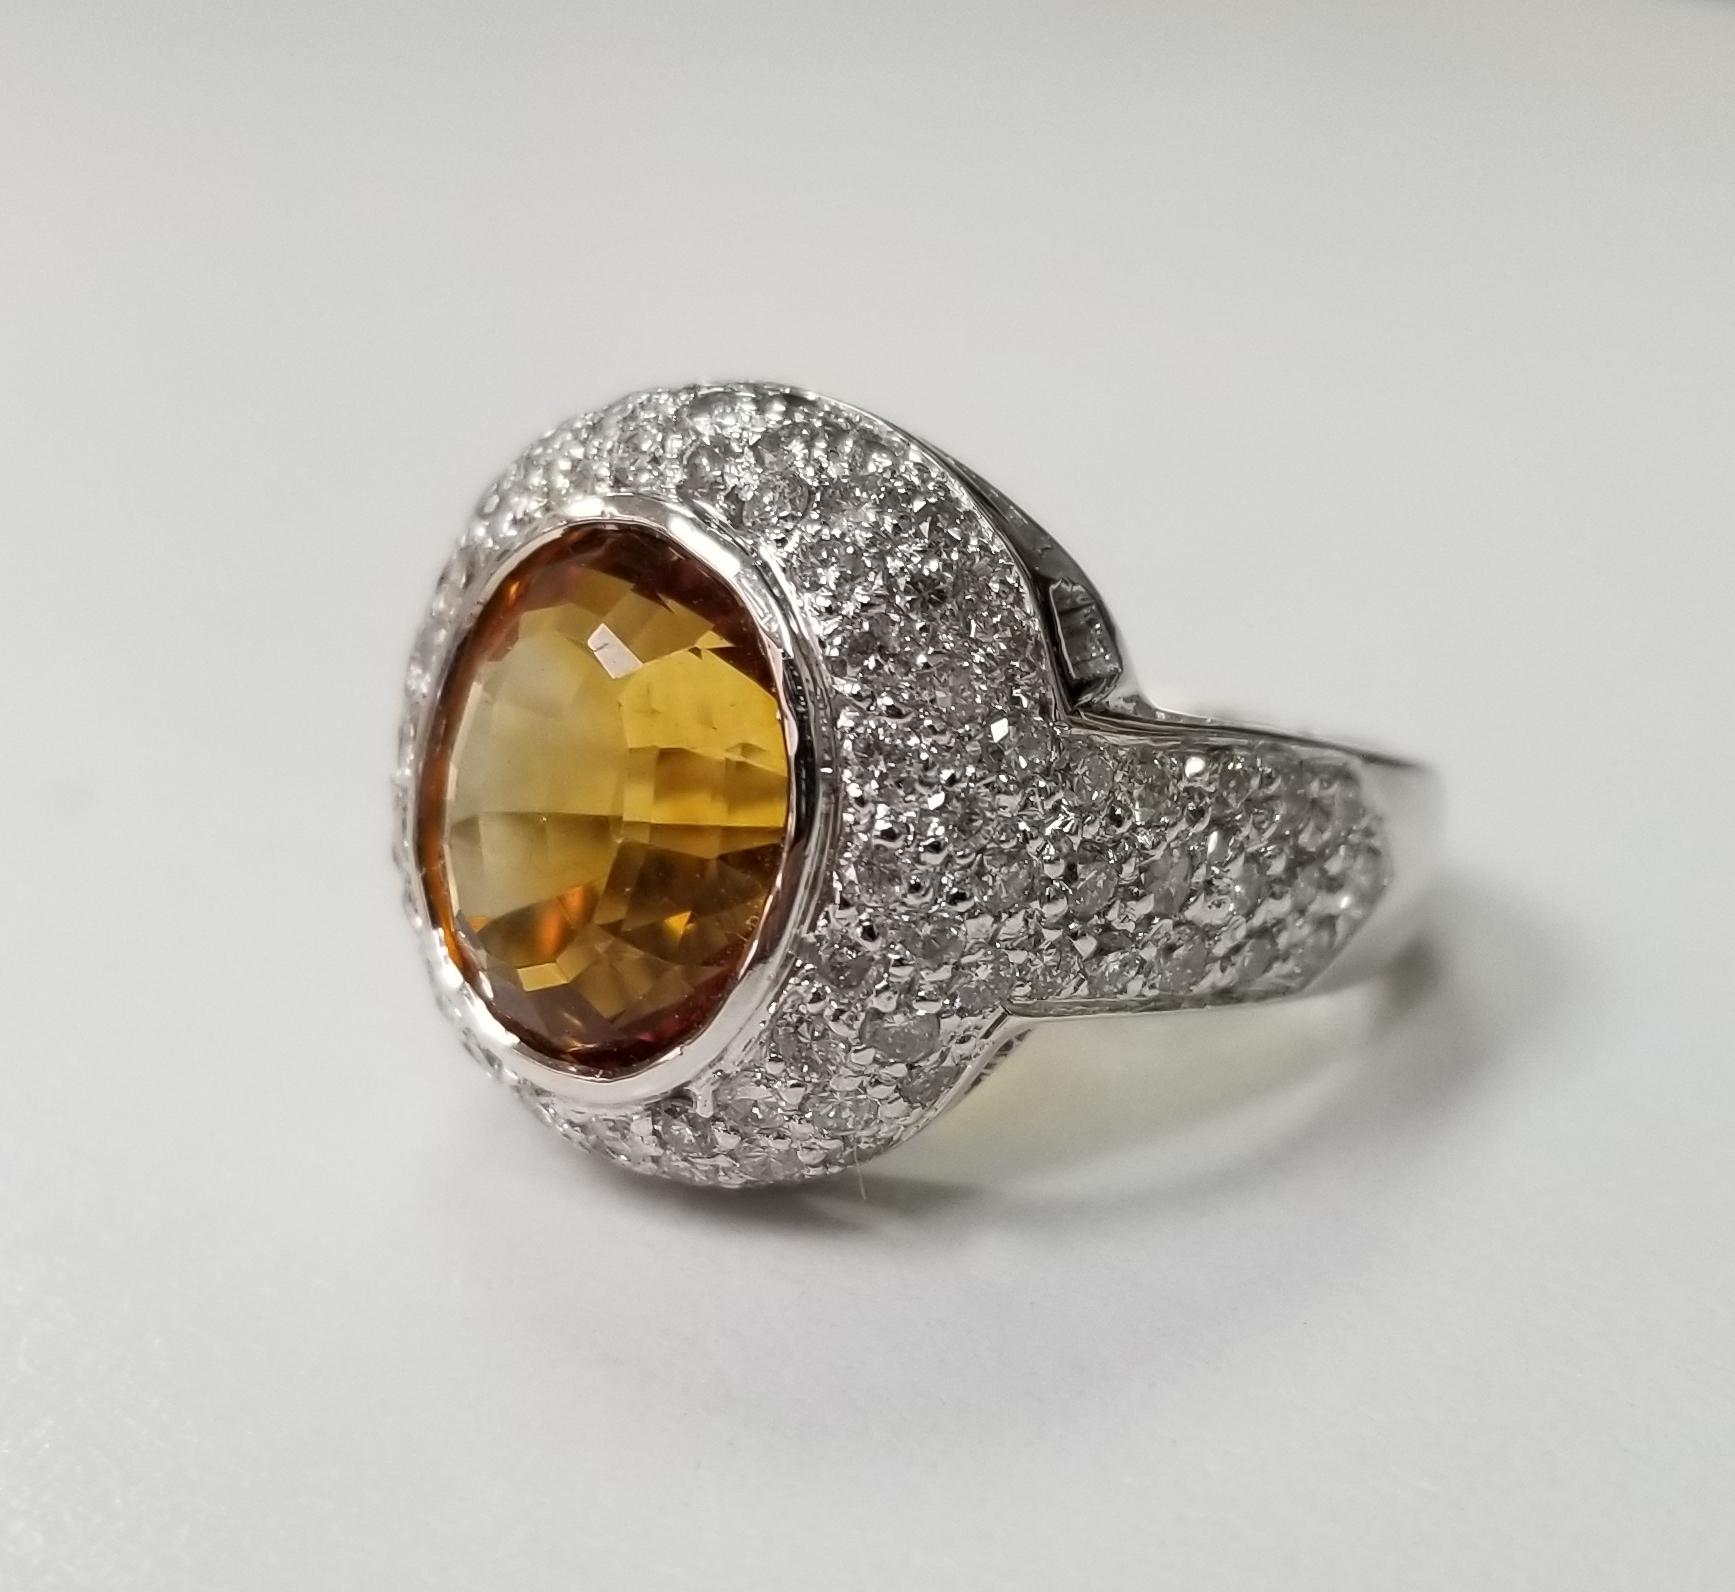 14k white gold Citrine topaz and diamond pave' ring, containing 1 oval Citrine topaz weighing 2.5cts. and 94 round full cut diamonds of very fine quality weighing 1.35ts.  This ring is a size 6 but we will size to fit for free.